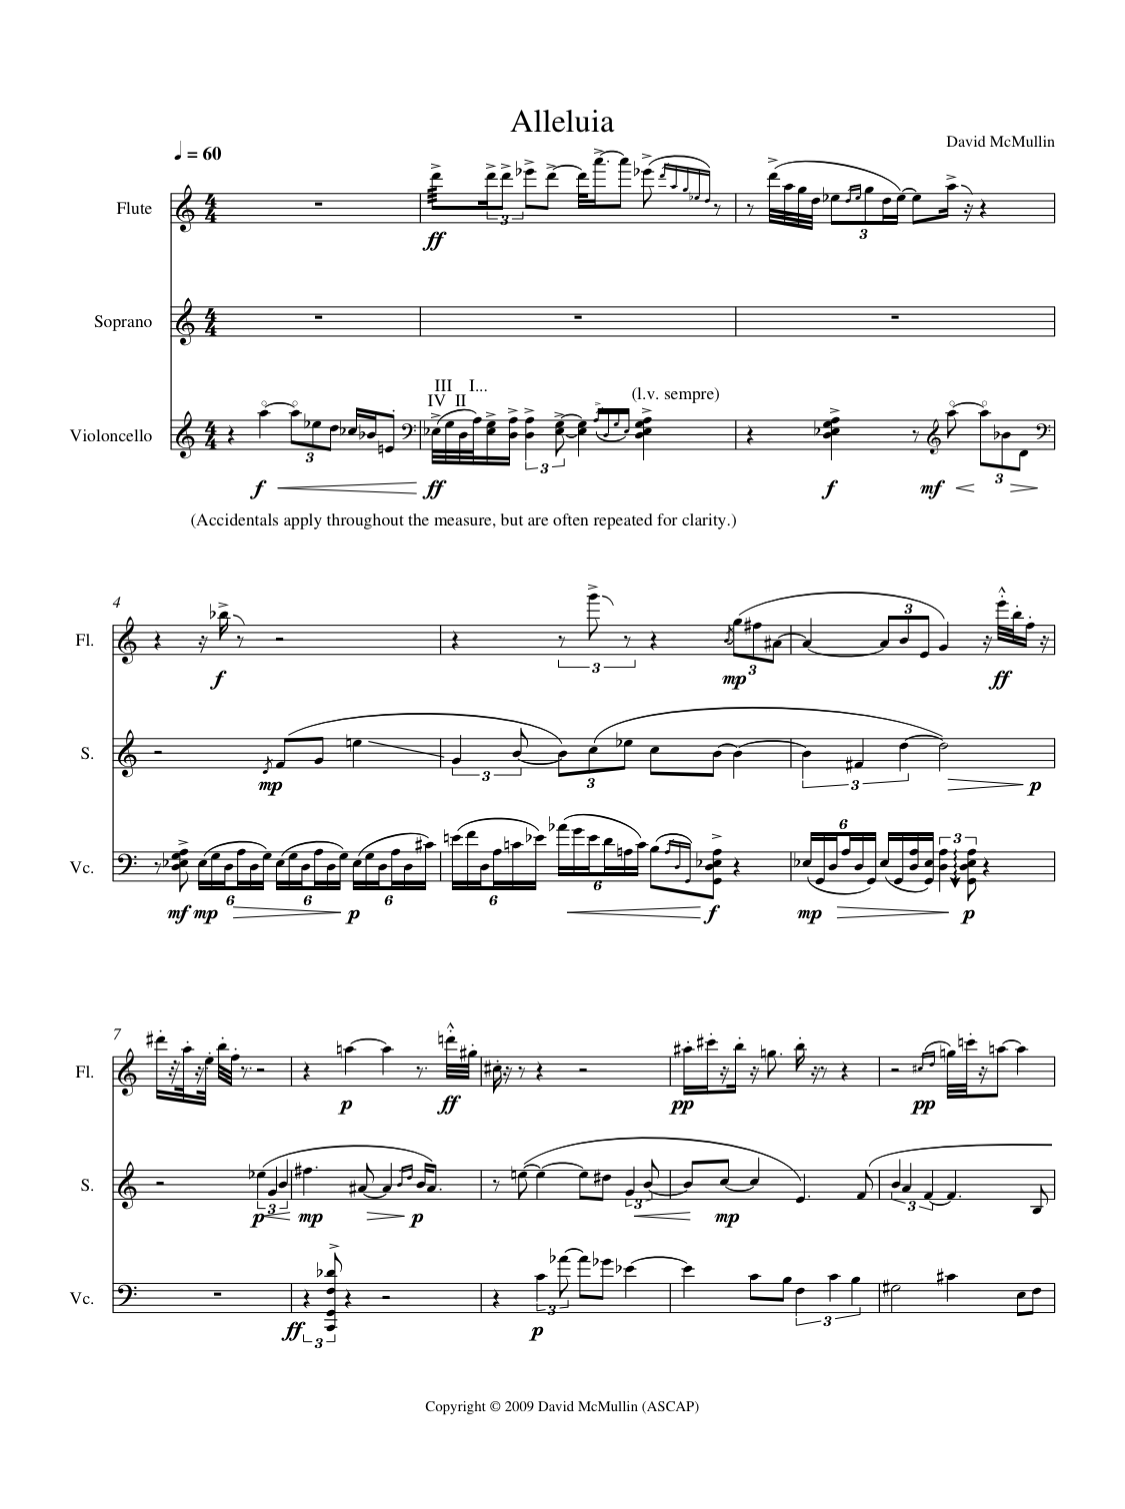 first page of score, links to open full PDF